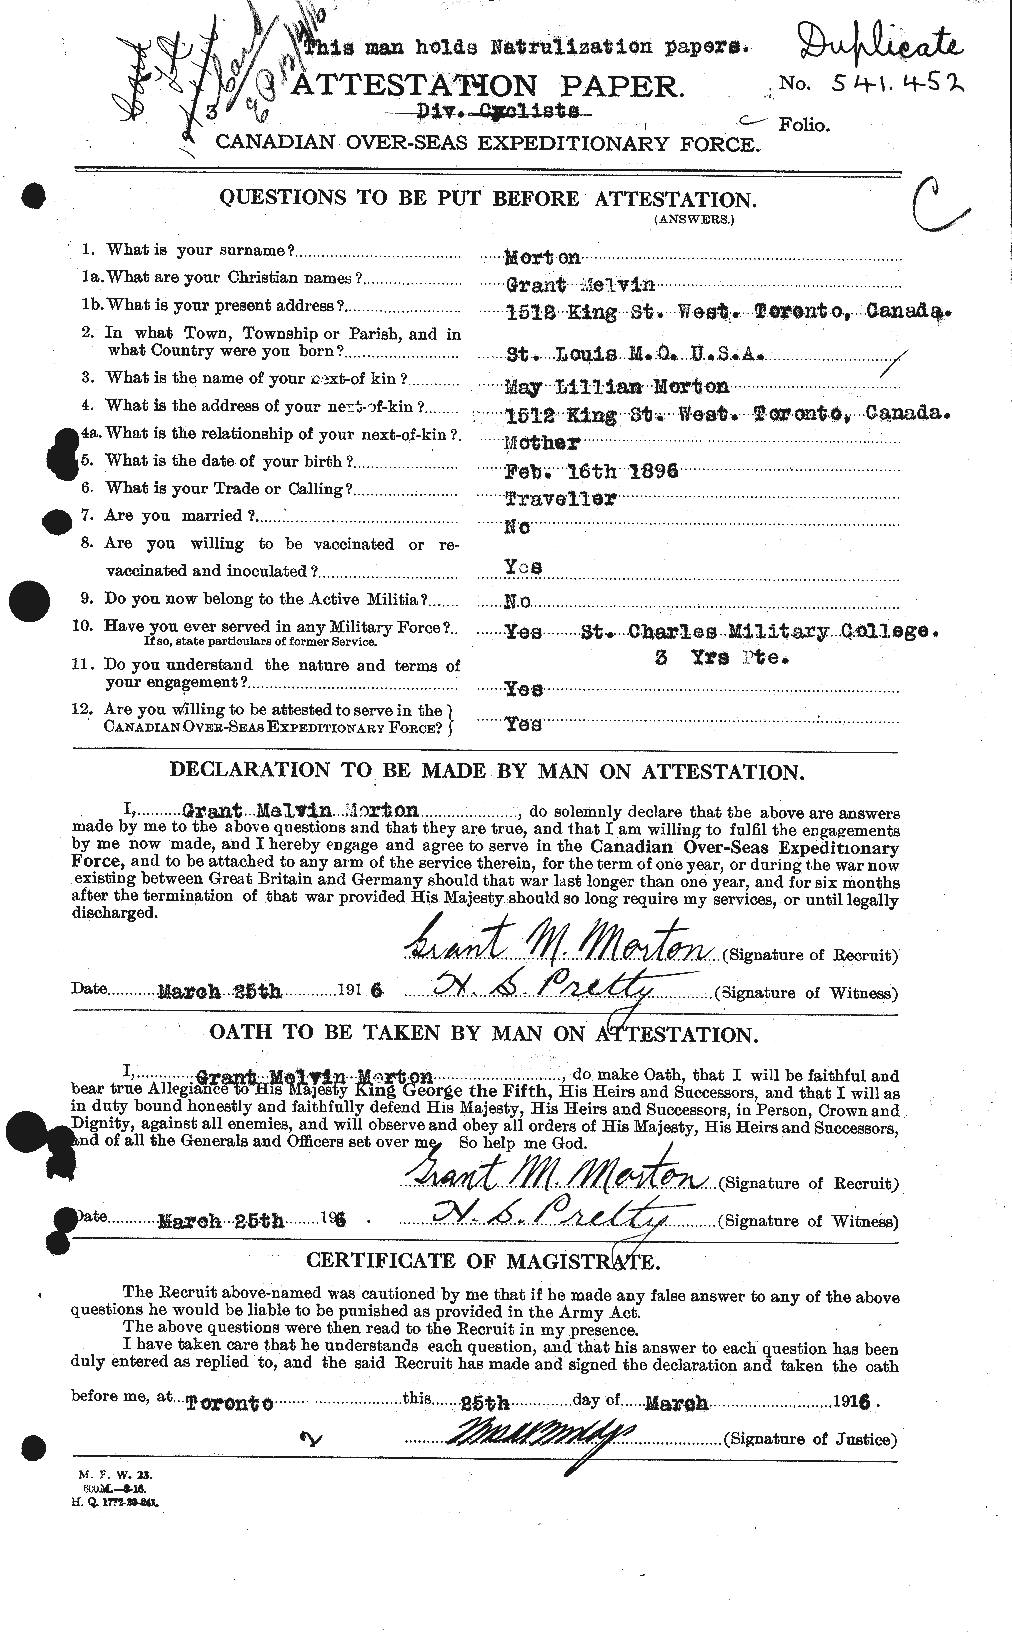 Personnel Records of the First World War - CEF 509850a